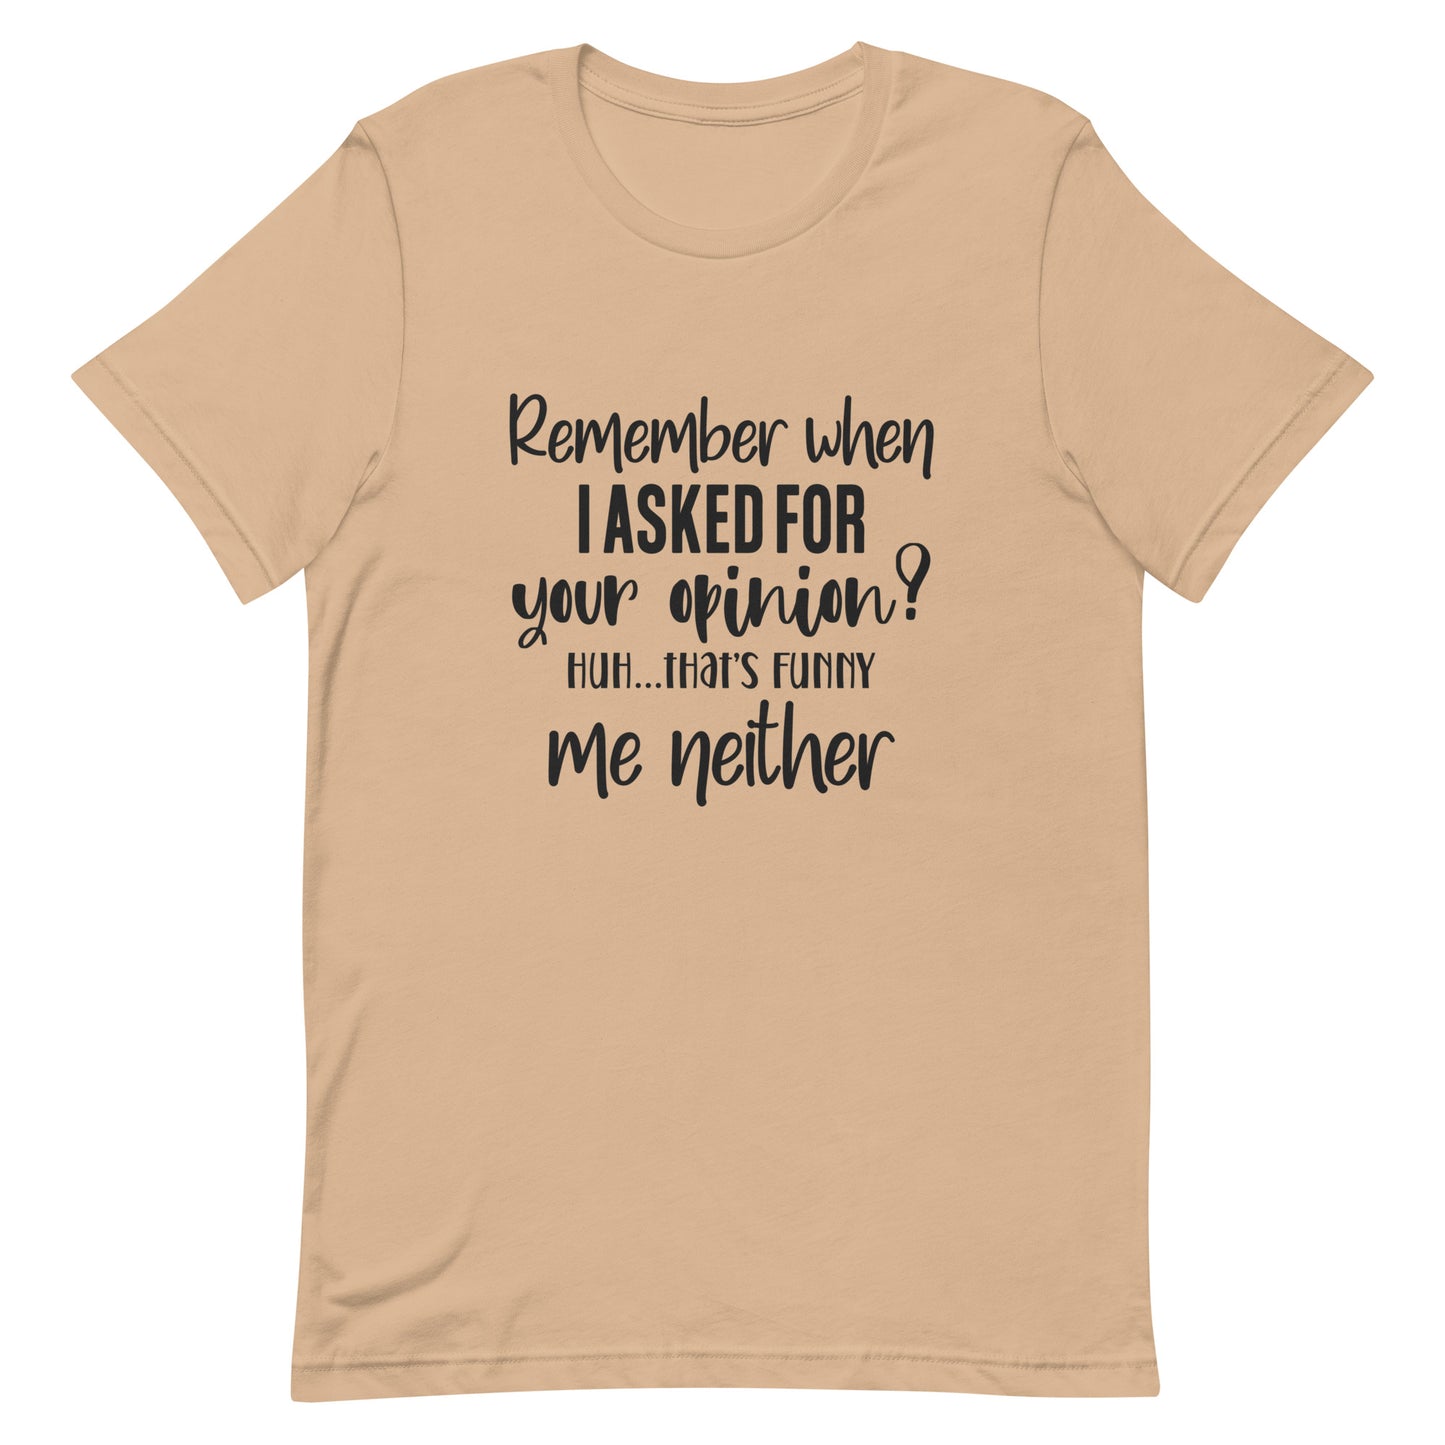 Remember When I Asked for Your Opinion? Ha That's Funny.  Me Neither. Unisex t-shirt